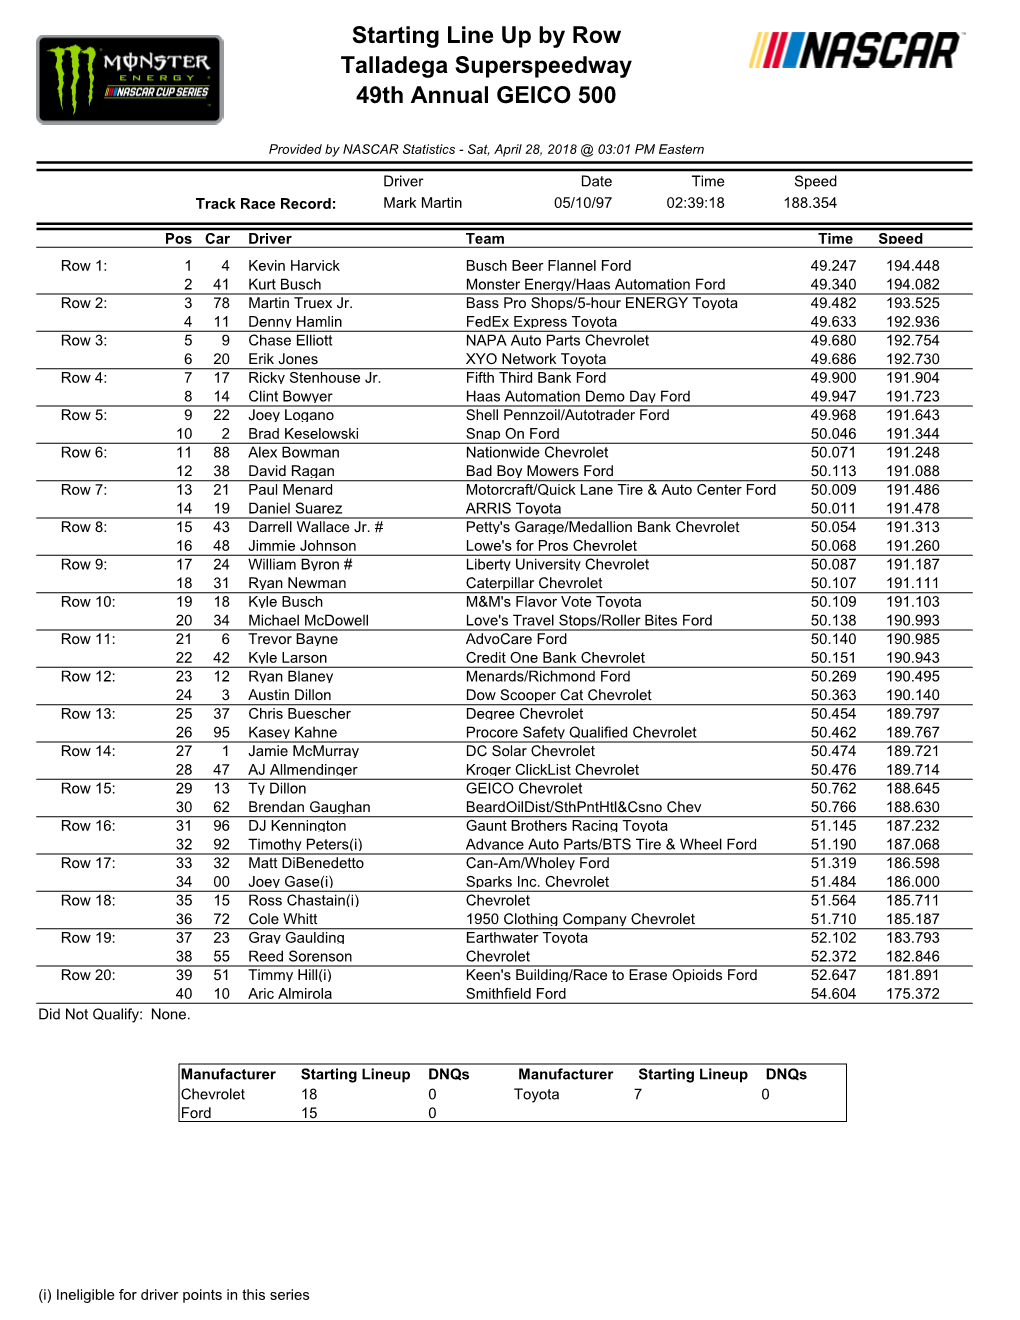 Starting Line up by Row Talladega Superspeedway 49Th Annual GEICO 500